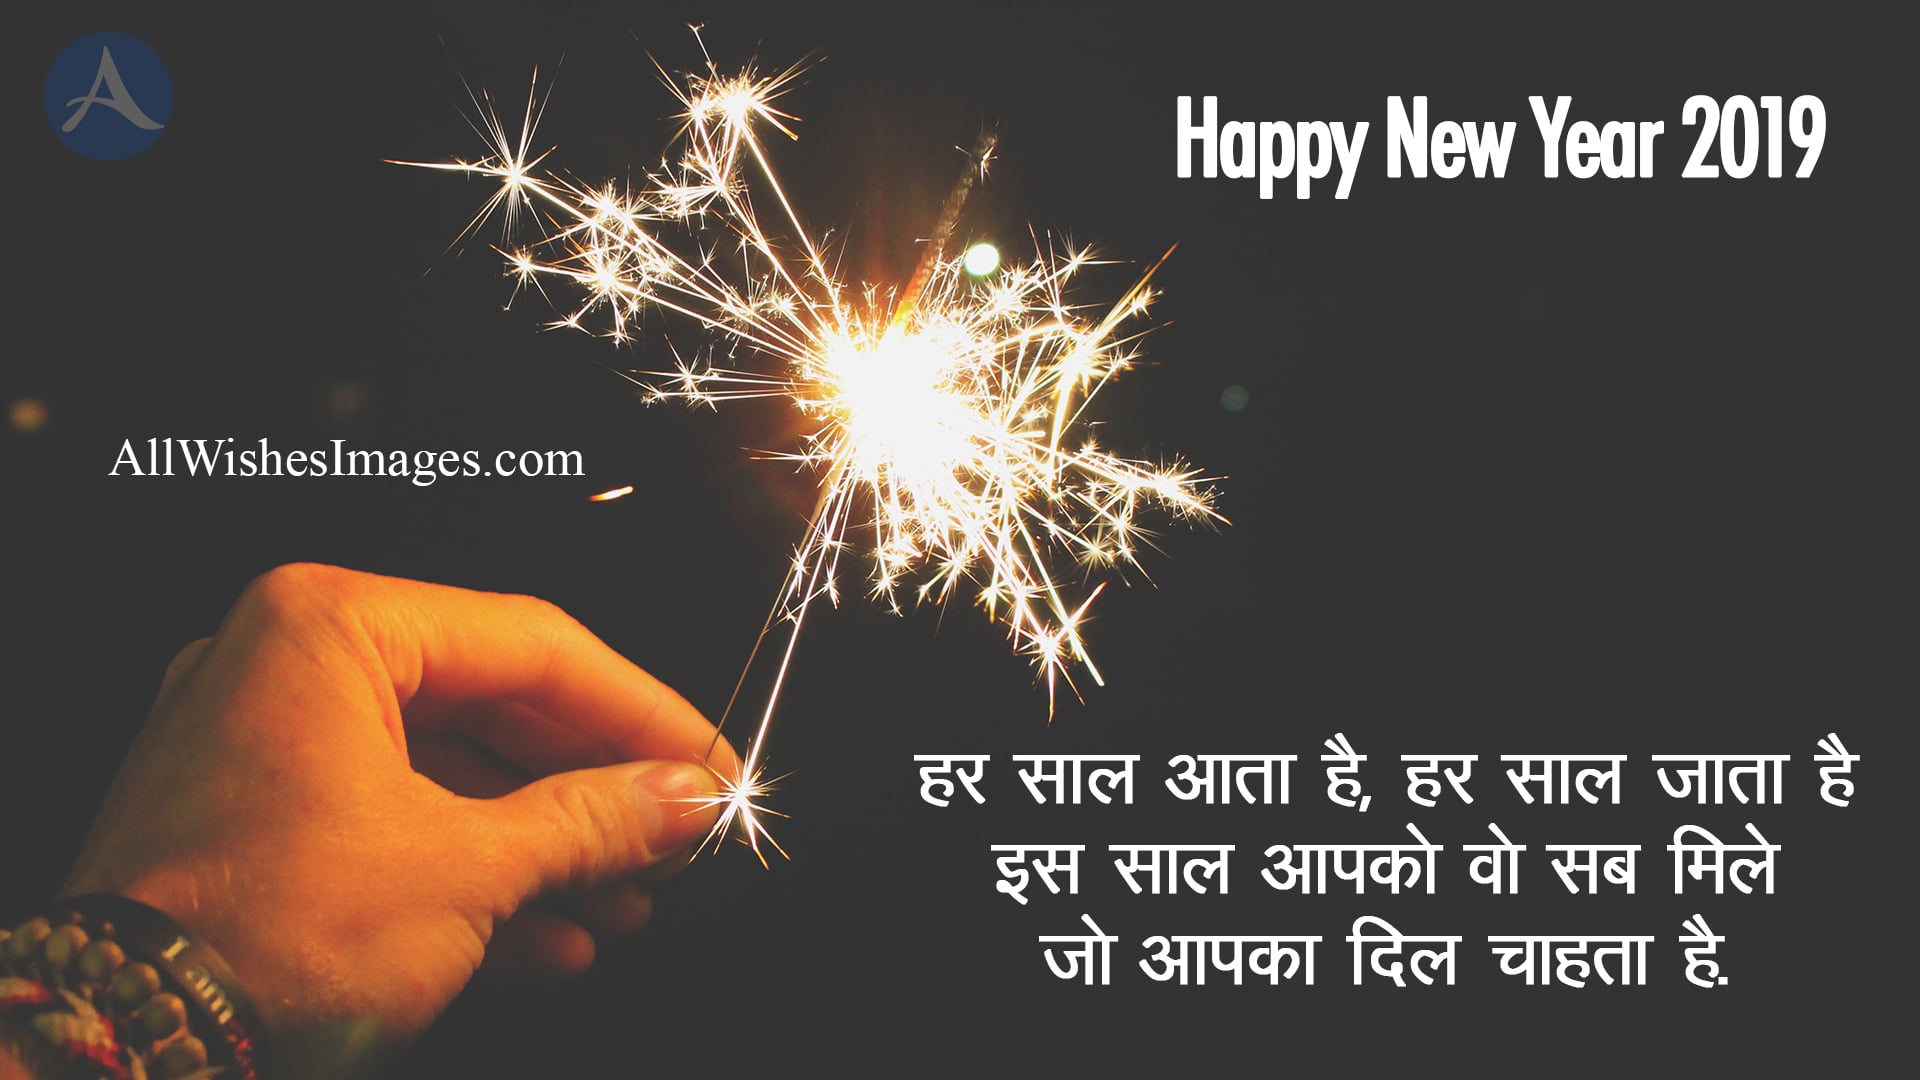 Happy New Year Hindi Shayari Image - All Wishes Images - Images for WhatsApp